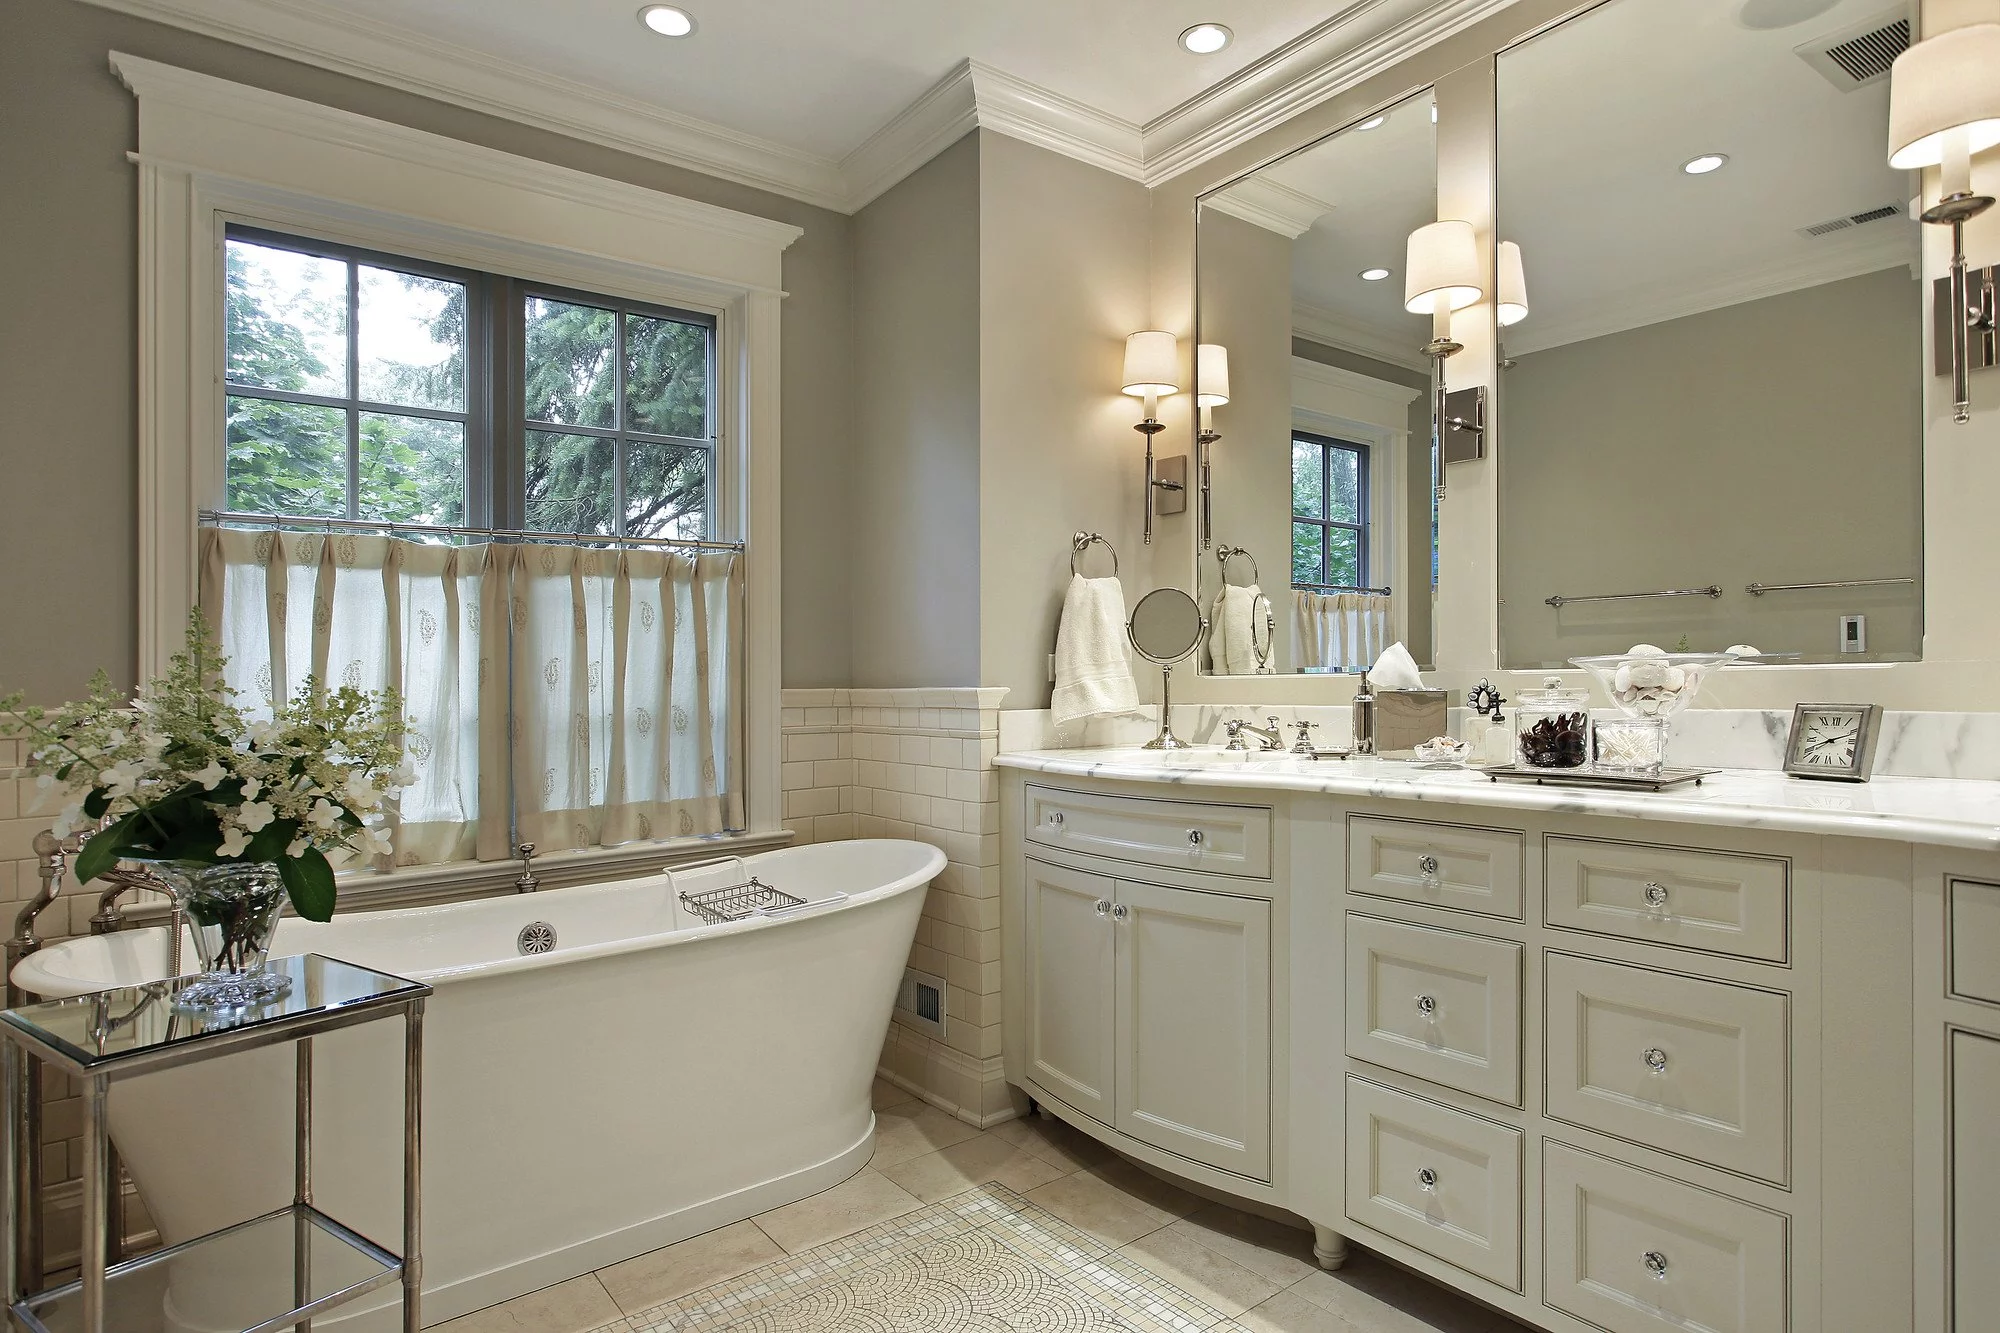 Will Taking Out A Bathtub Affect Your Home’s Resale Value?